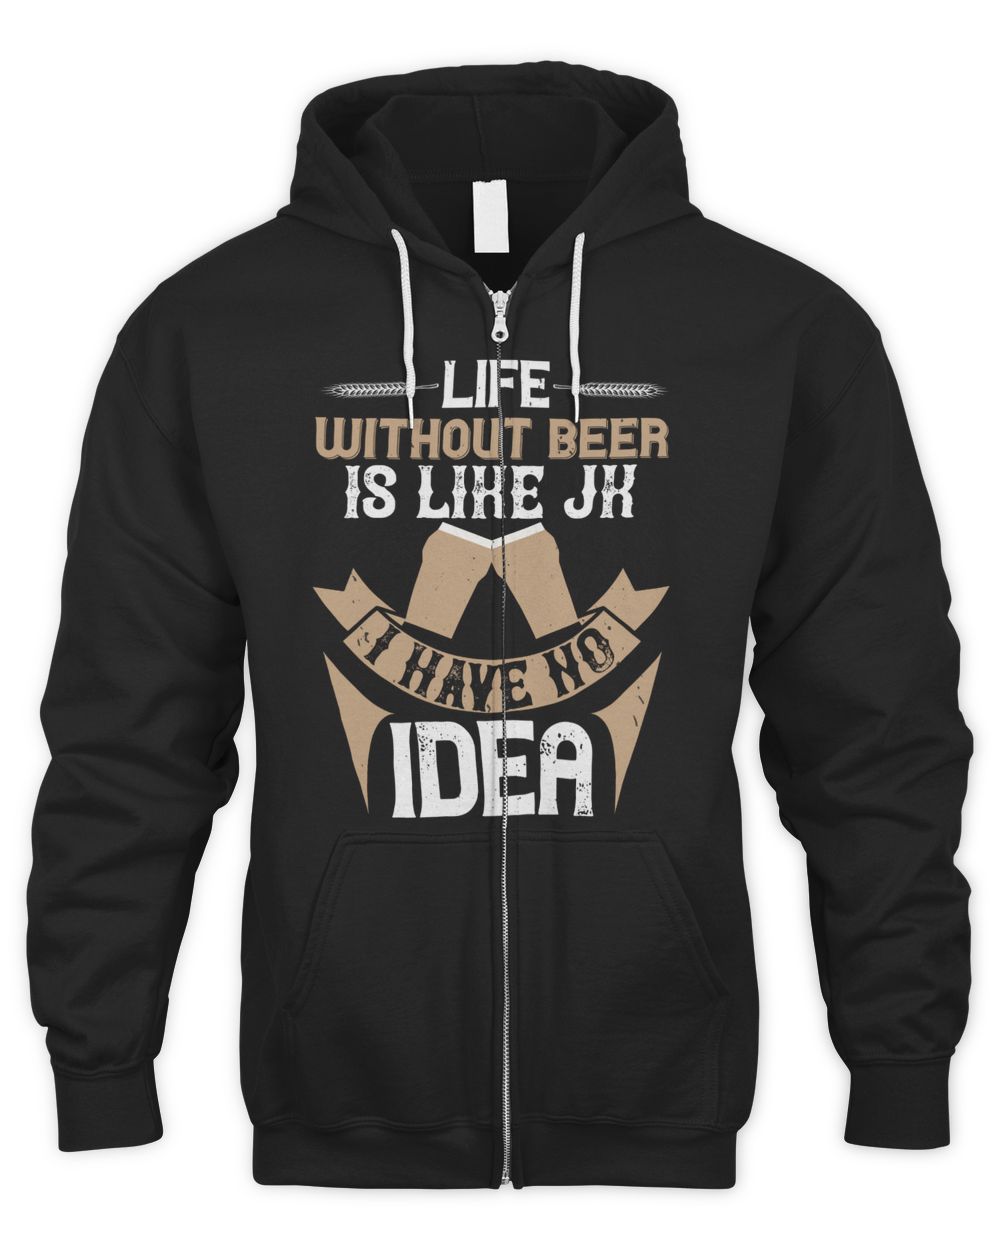 Life Without Beer Is Like Jk I Have No Idea Beer Shirt For Beer Lover With Free Shipping, Great Gift For Fathers Day Men's Zip Hoodie black 